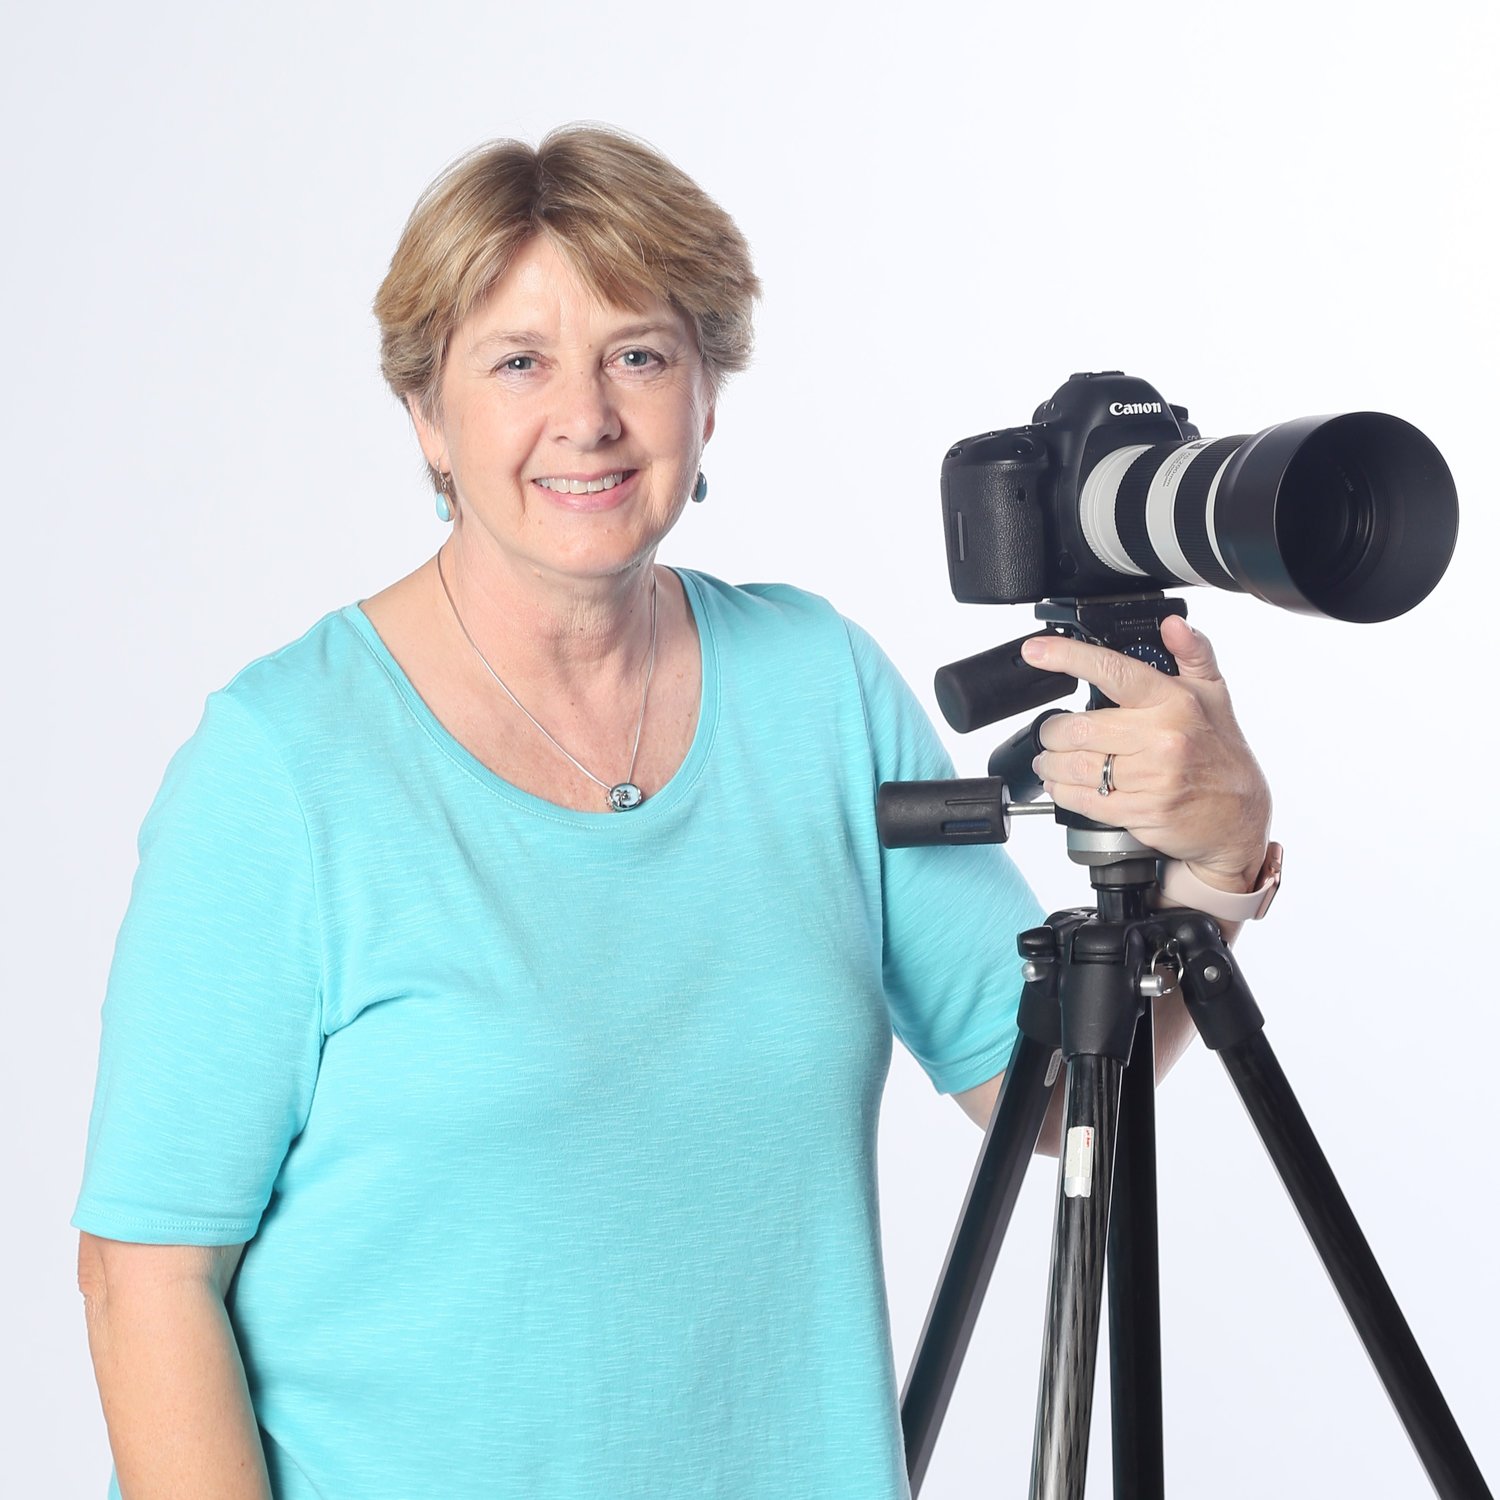 Luanne McCarley of Photos by Lulu joins prestigious group as a Certified Professional Photographer (CPP).